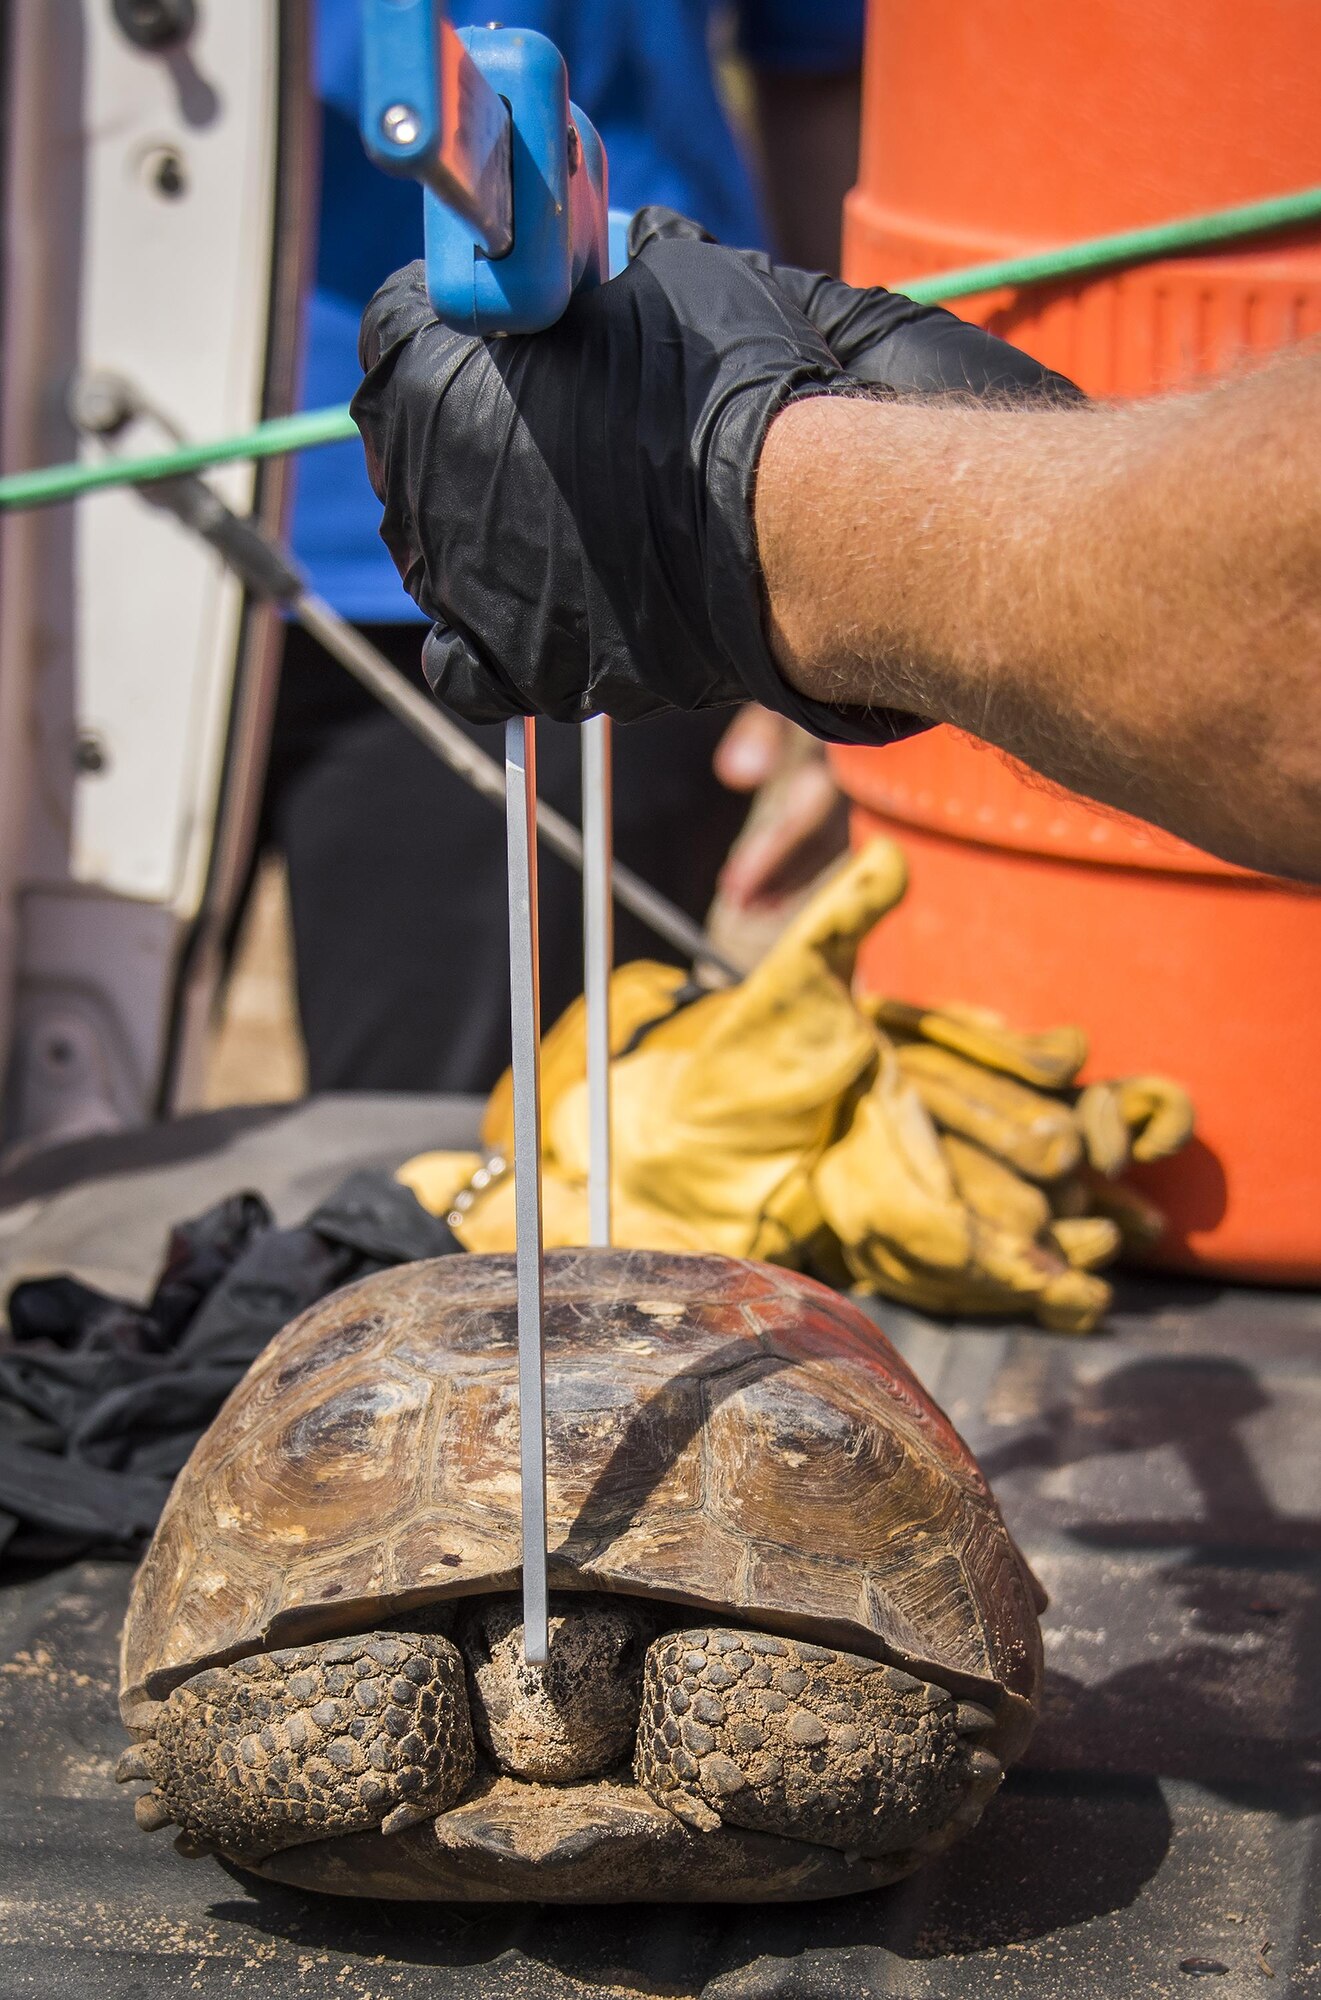 A gopher tortoise is measured prior to being released into its new home deep within the Eglin Air Force Base range Oct. 26.  The first of approximately 250 tortoises were released into their 100-acre environment after being rescued from urban development at their previous home in South Florida.  Increasing the gopher tortoise population here could prevent the U.S. Fish and Wildlife Service from listing the animal on the Threatened and Endangered Species list, allowing more flexibility for the military missions on Eglin. (U.S. Air Force photo/Samuel King Jr.)